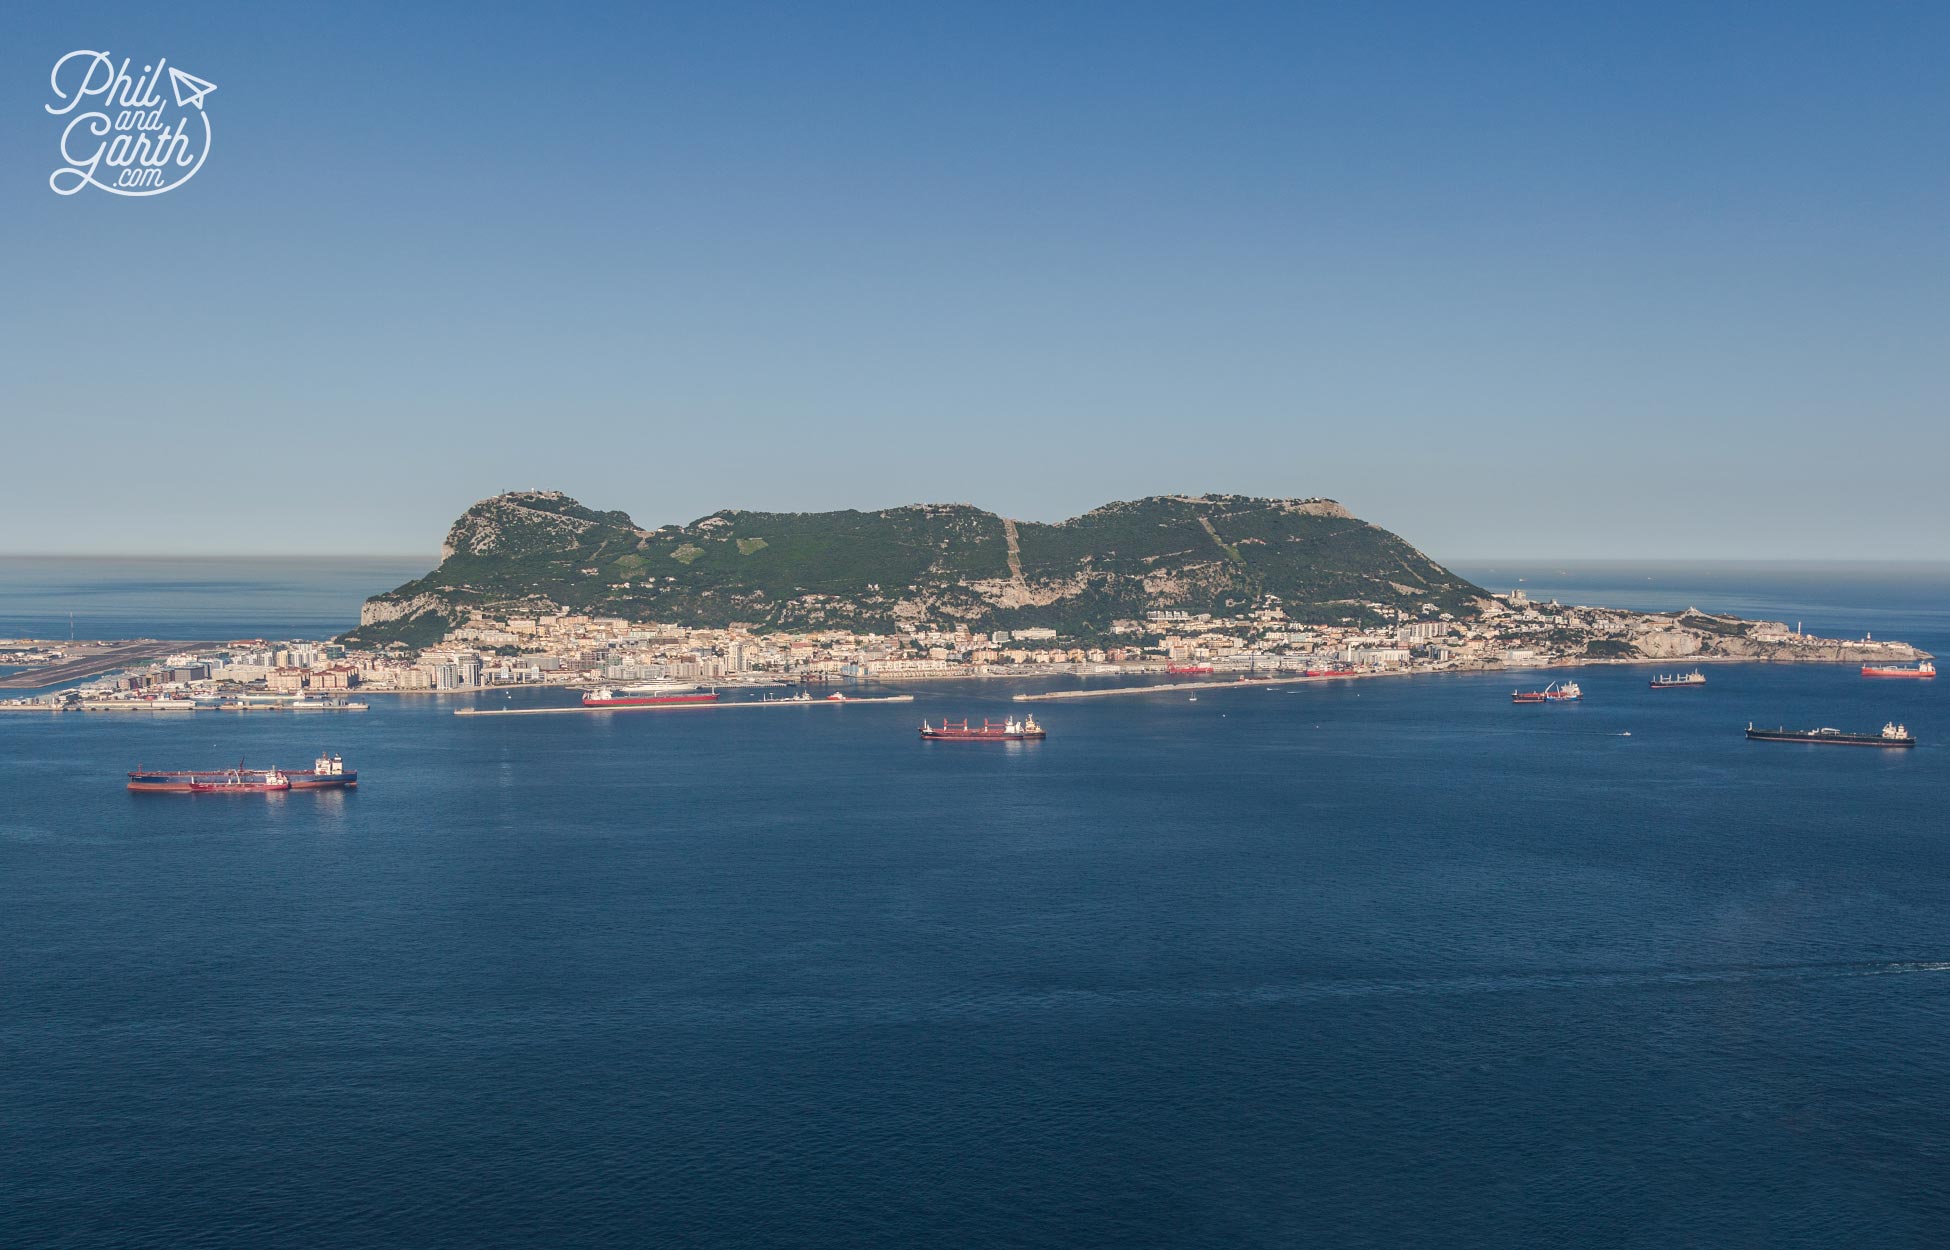 Gibraltar is a British Overseas Territory